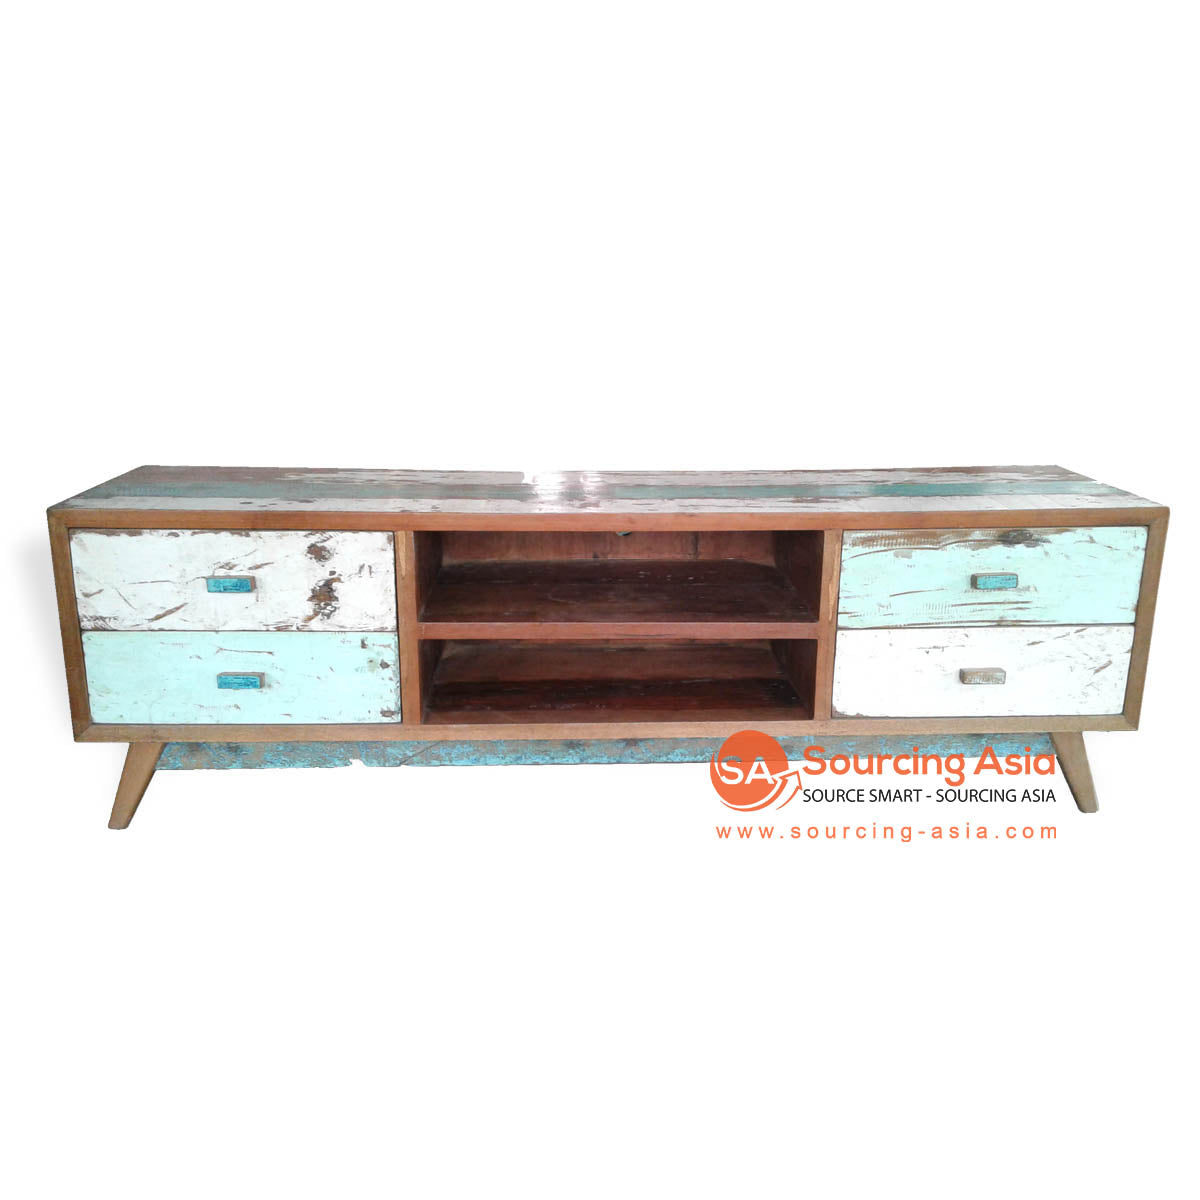 KPL067-1 ﻿NATURAL BOAT WOOD FOUR DRAWERS AND TWO SHELVES ENTERTAINMENT UNIT